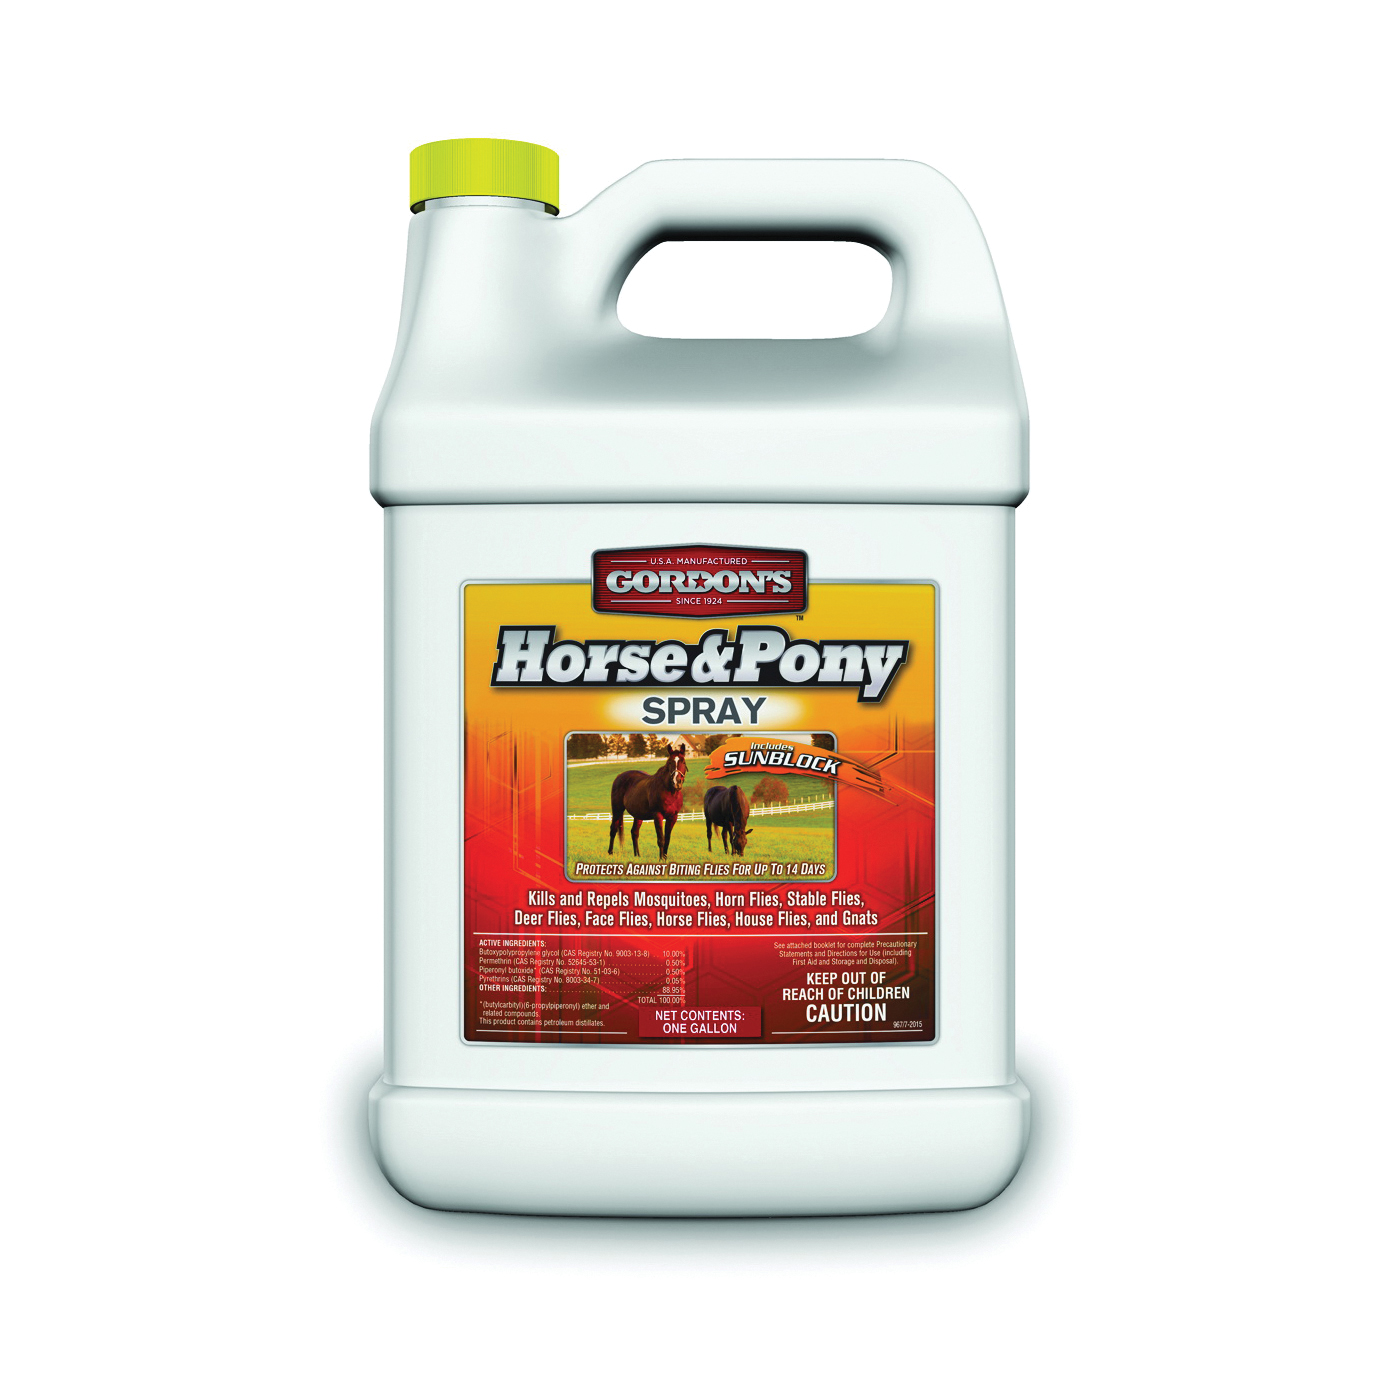 9671072 Horse and Pony Insect Spray, Liquid, Amber, Perfumed, 1 gal